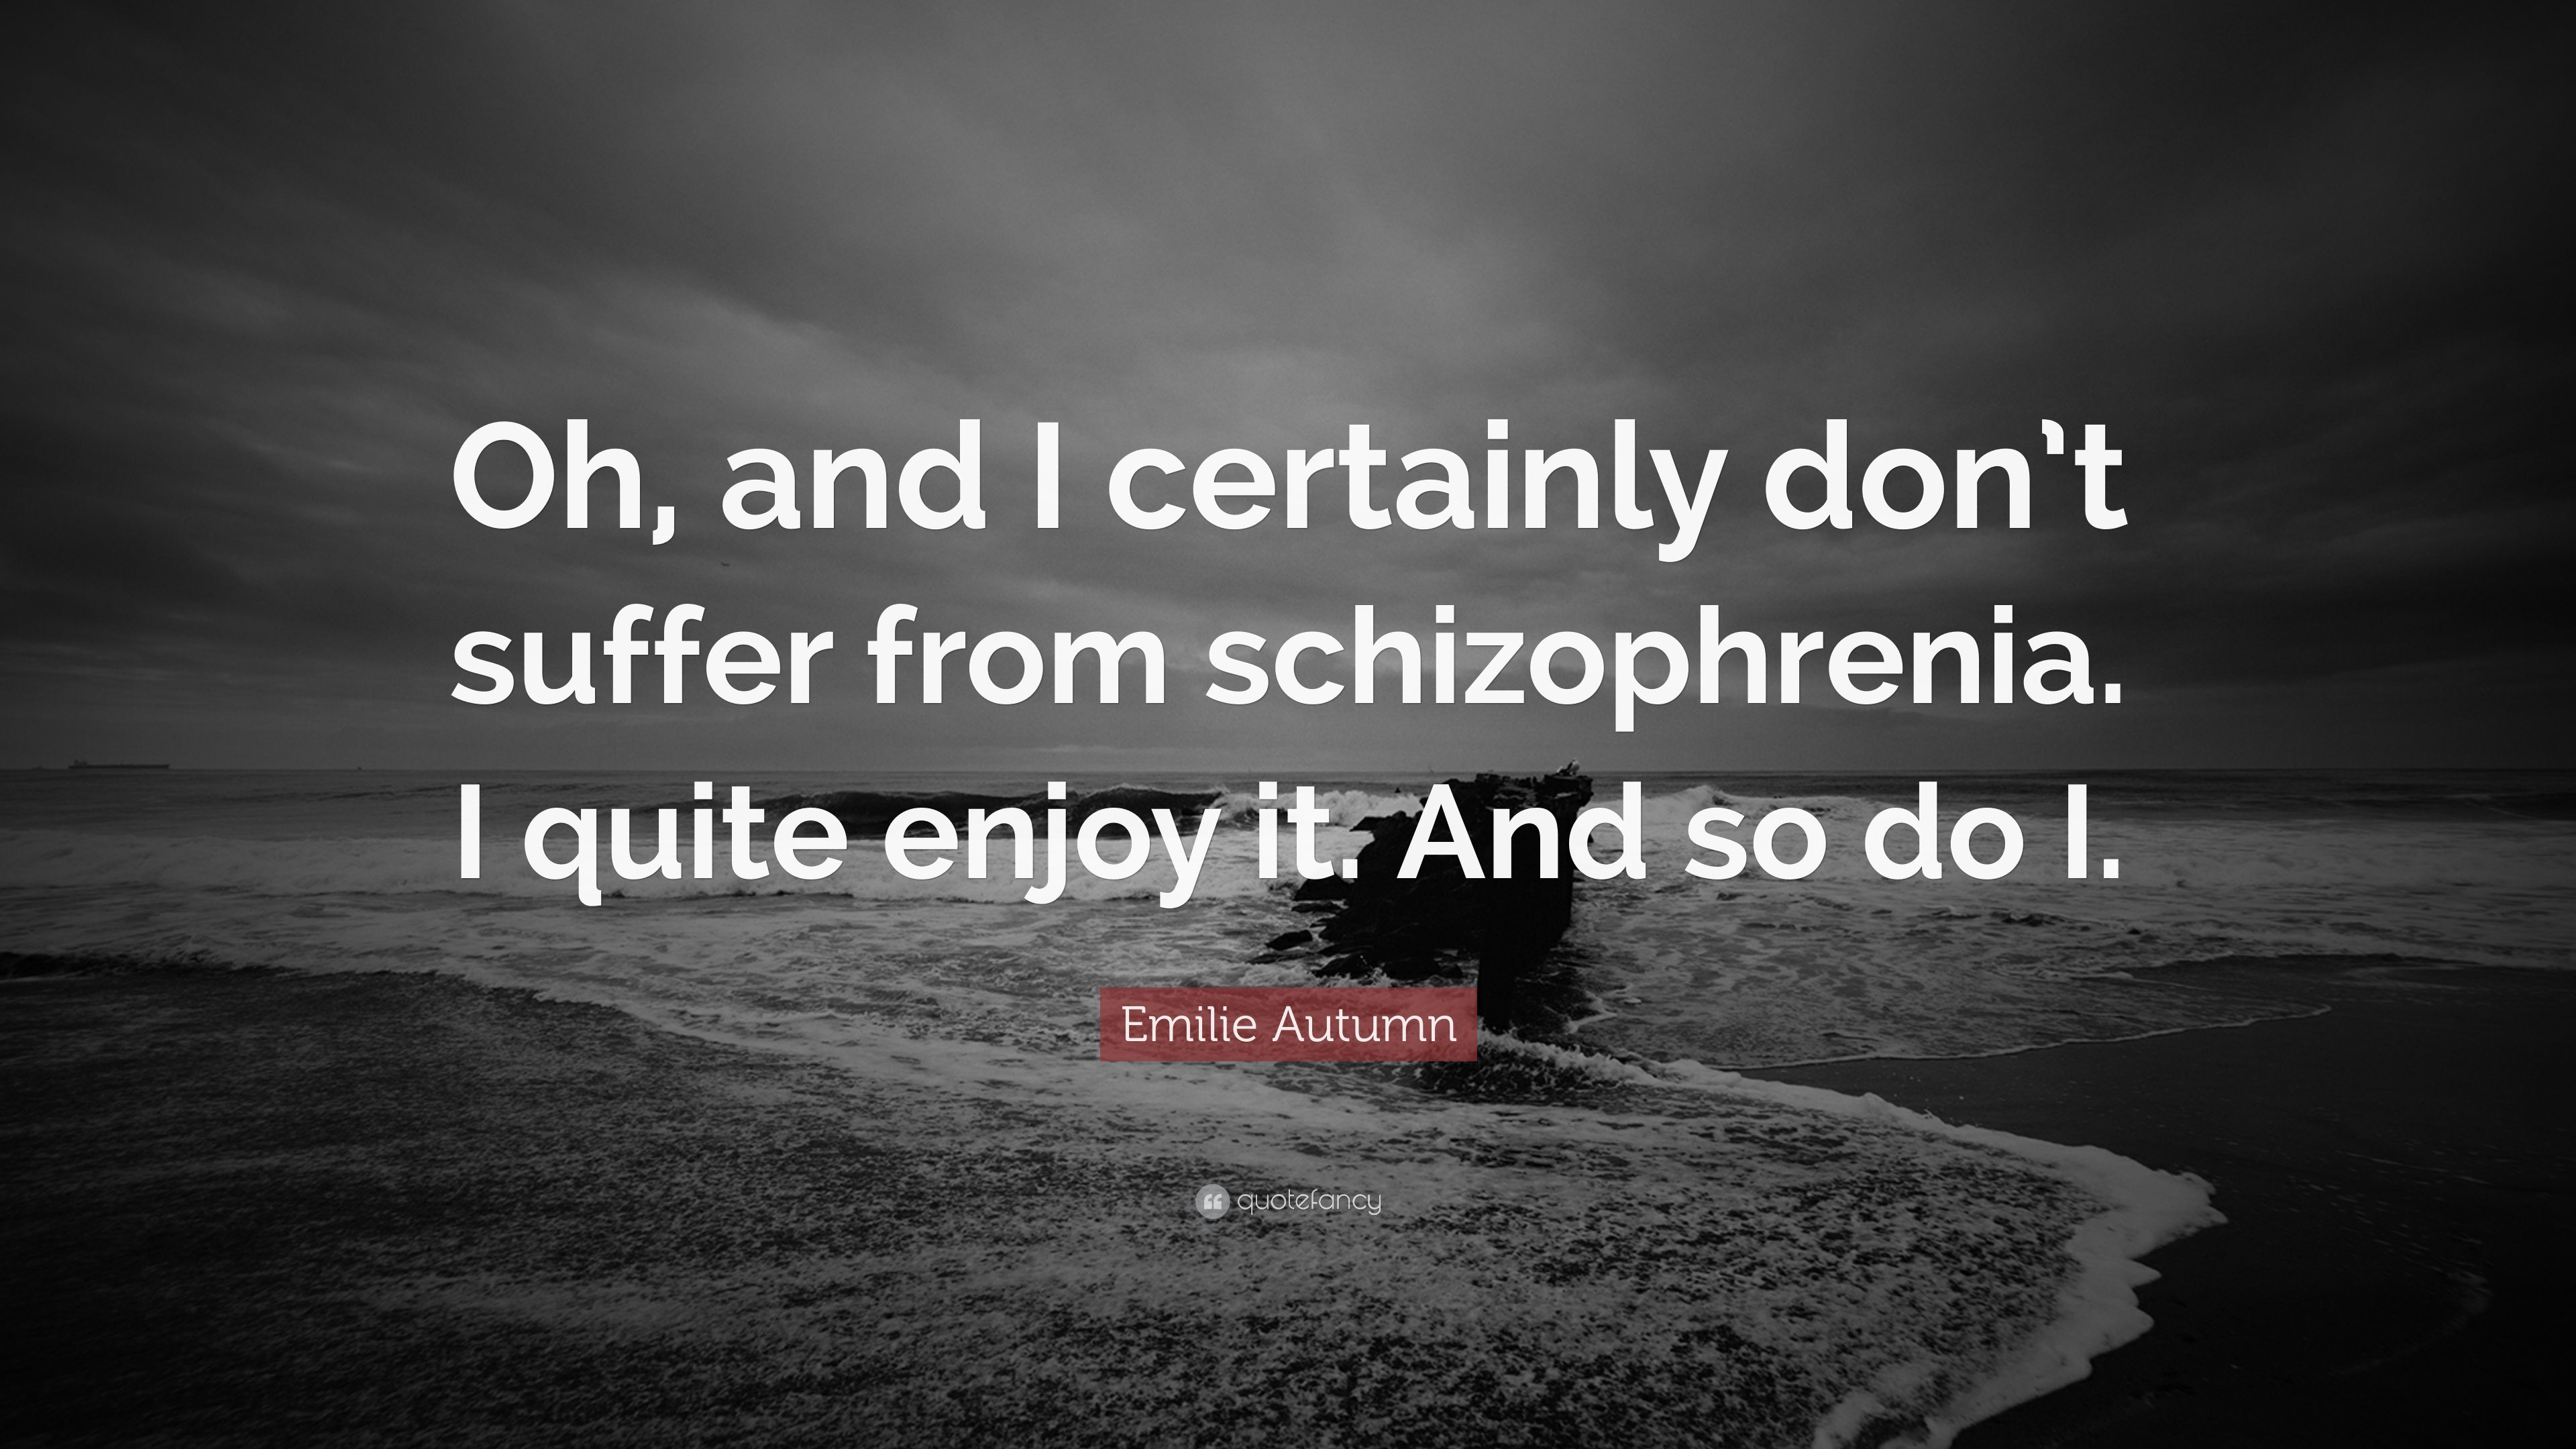 Emilie Autumn Quote: “Oh, and I certainly don't suffer from schizophrenia. I quite enjoy it. And so do I.” (6 wallpaper)